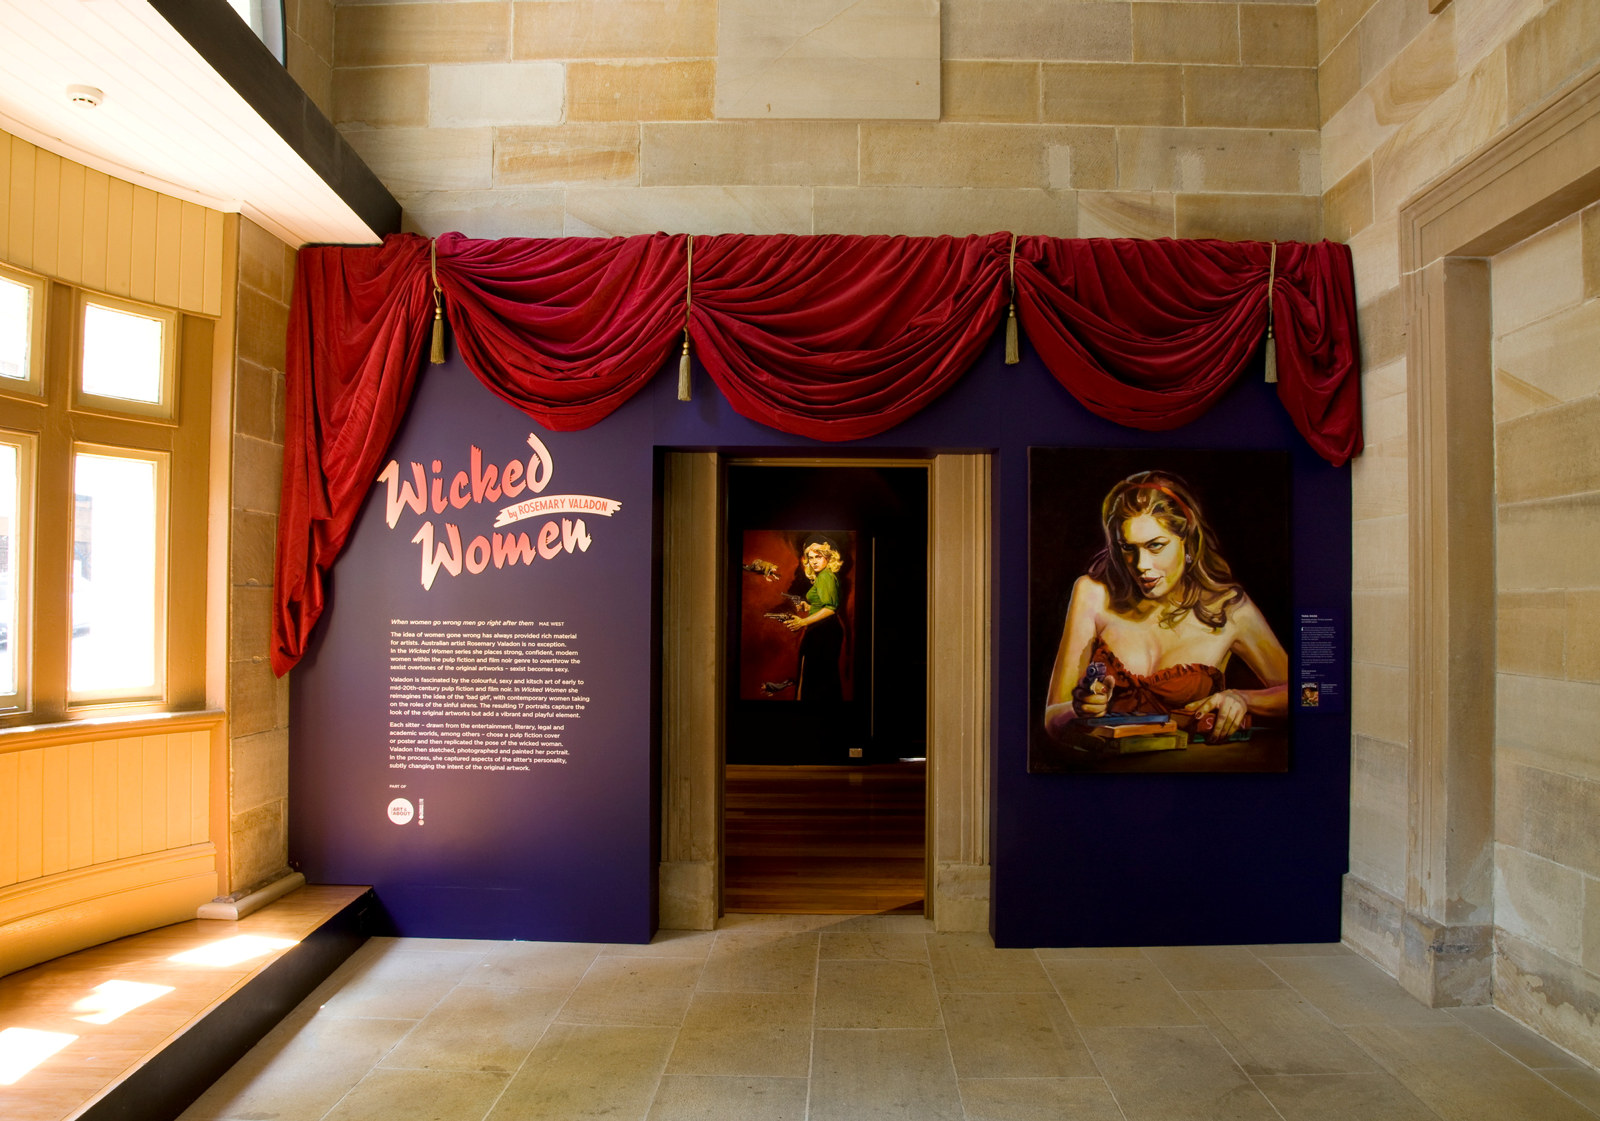 A red curtain hangs over the entranceway to the wicked woman exhibition. A text panel sits to the left of the door while a portrait of Tara Moss hangs to the right.